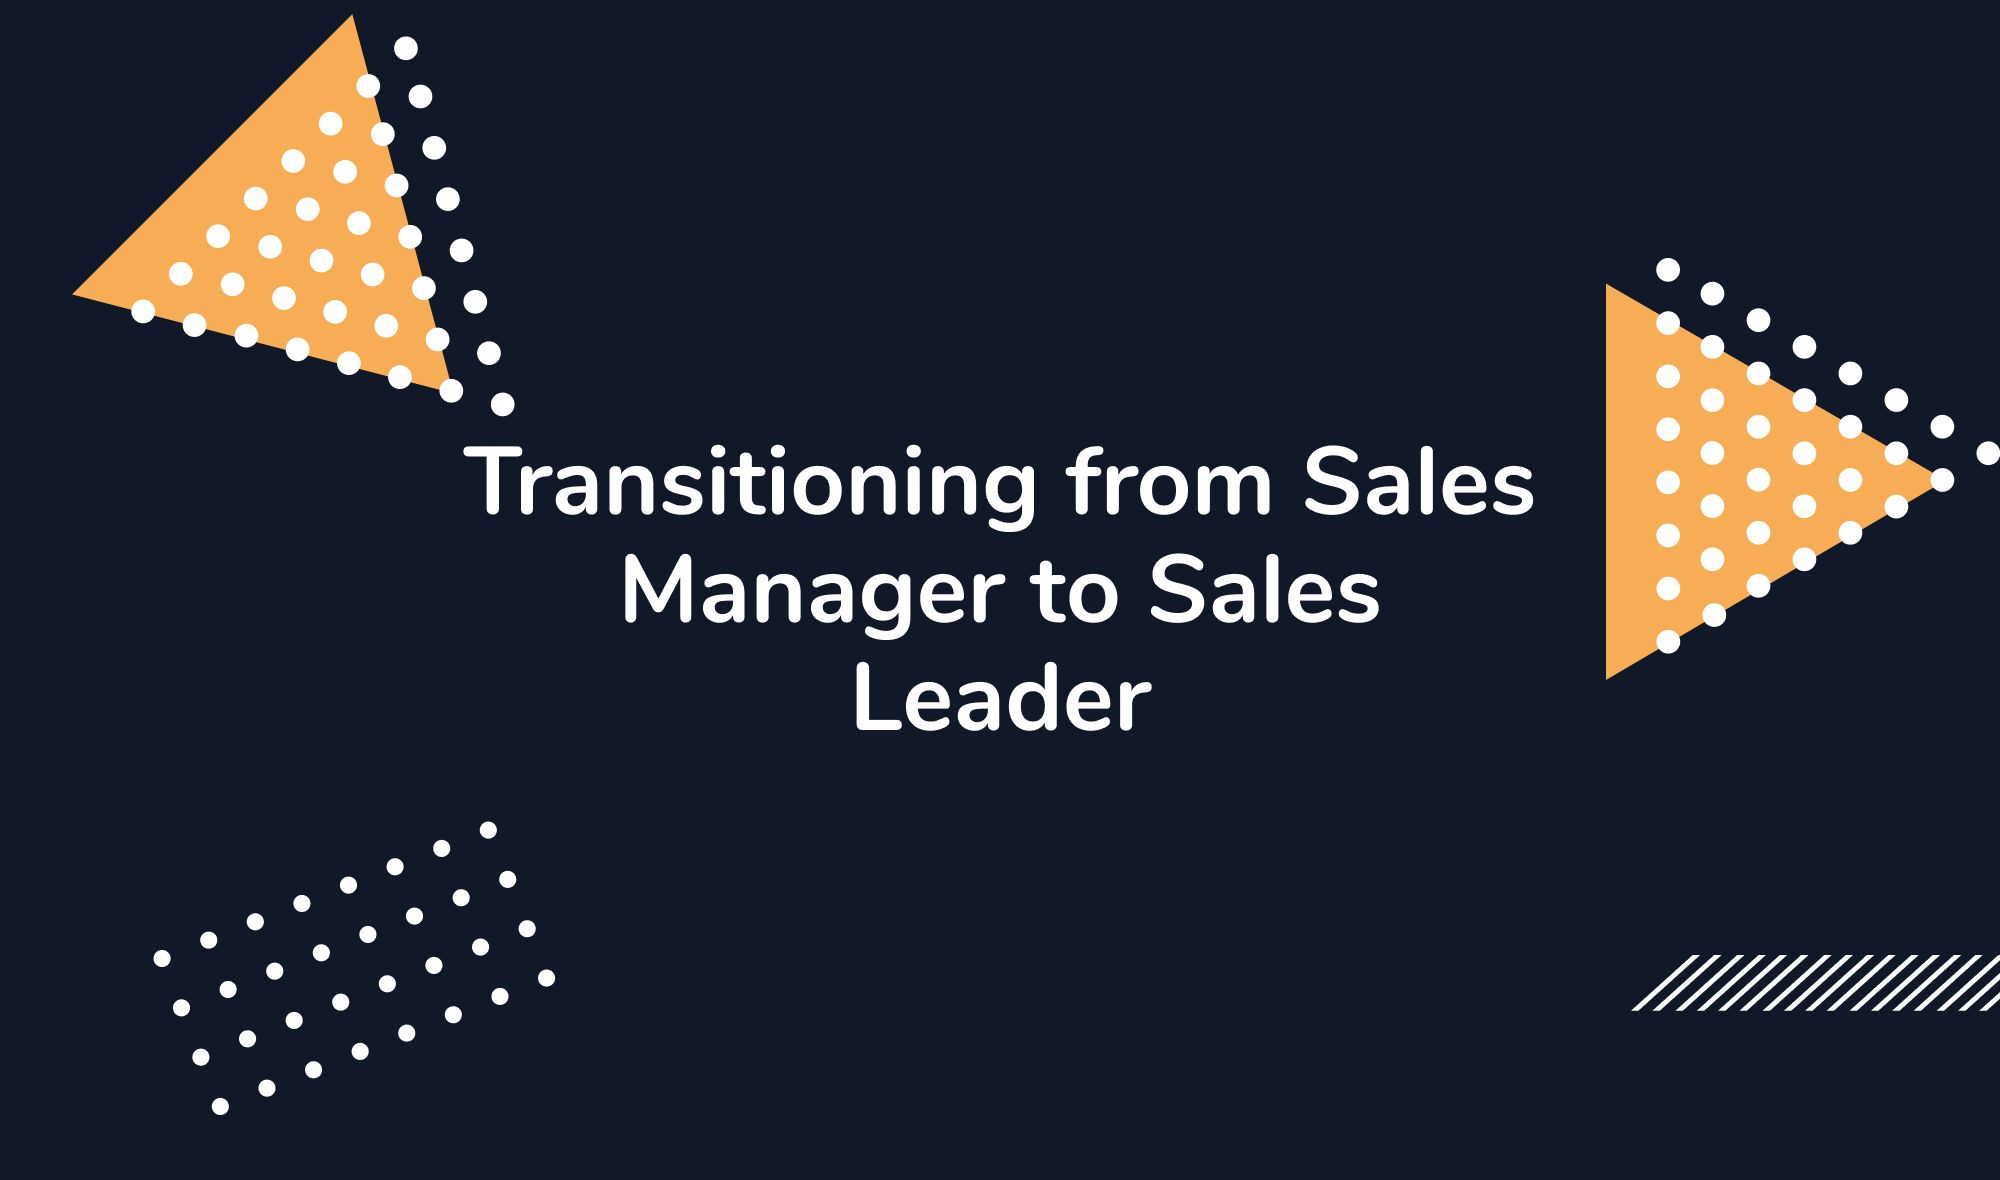 Transitioning from Sales Manager to Sales Leader